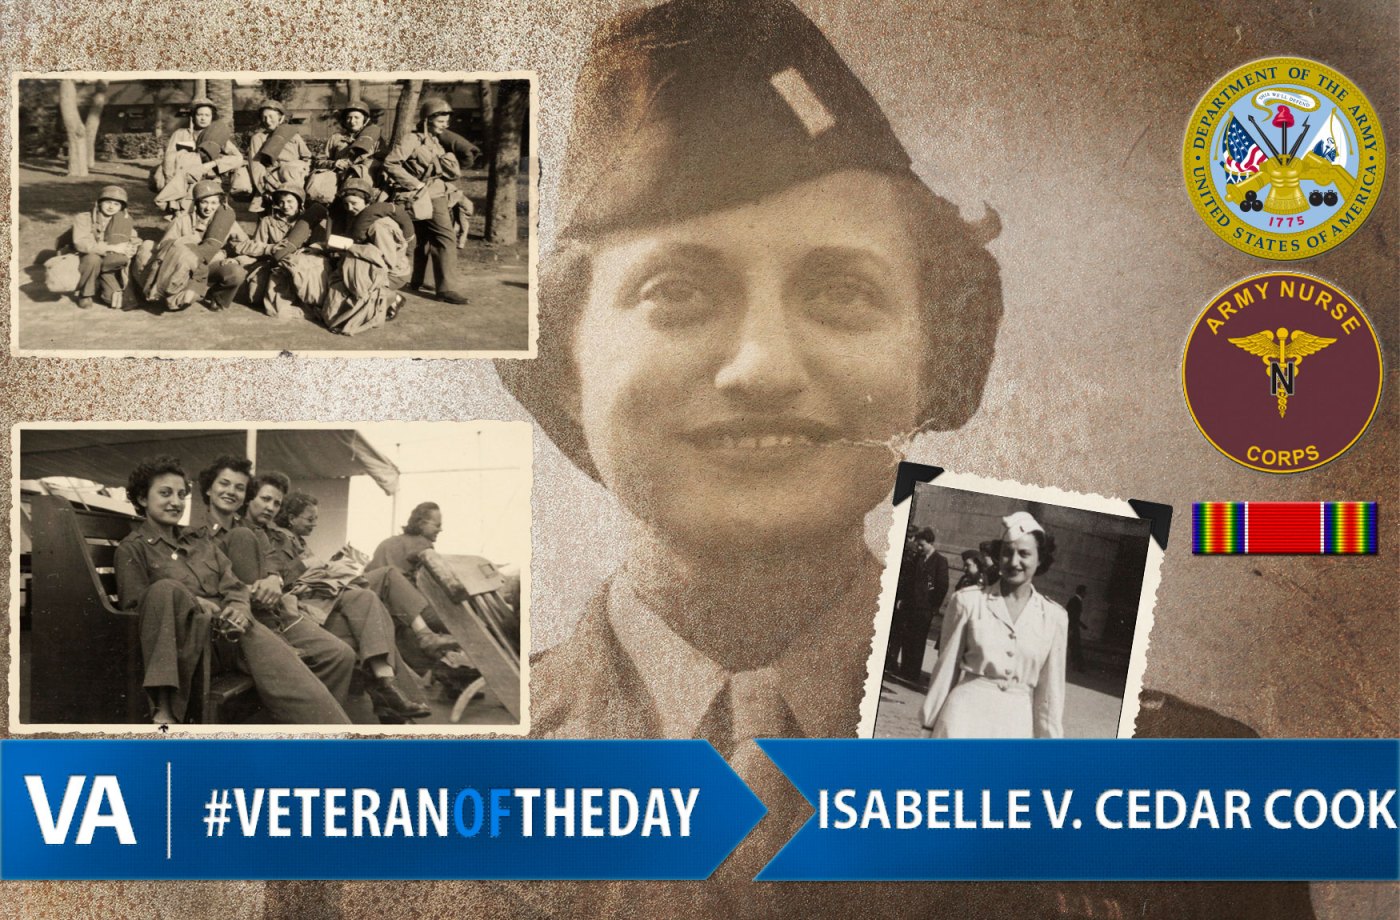 Isabelle Cook - Veteran of the Day